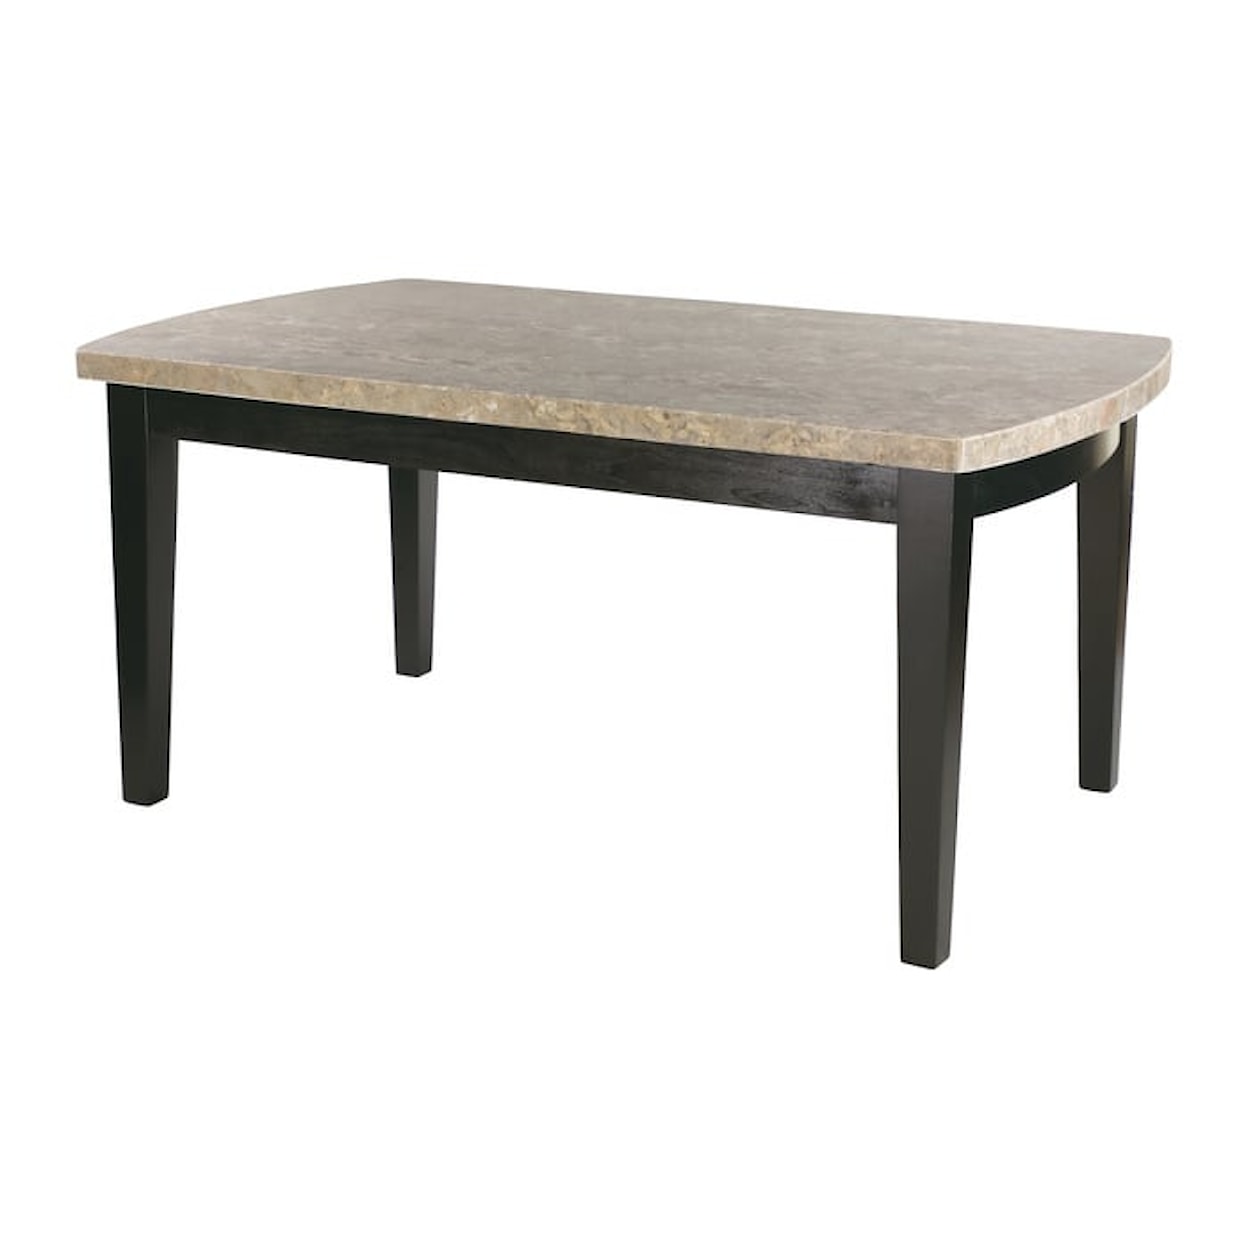 Homelegance Cristo Marble Top Dining Table